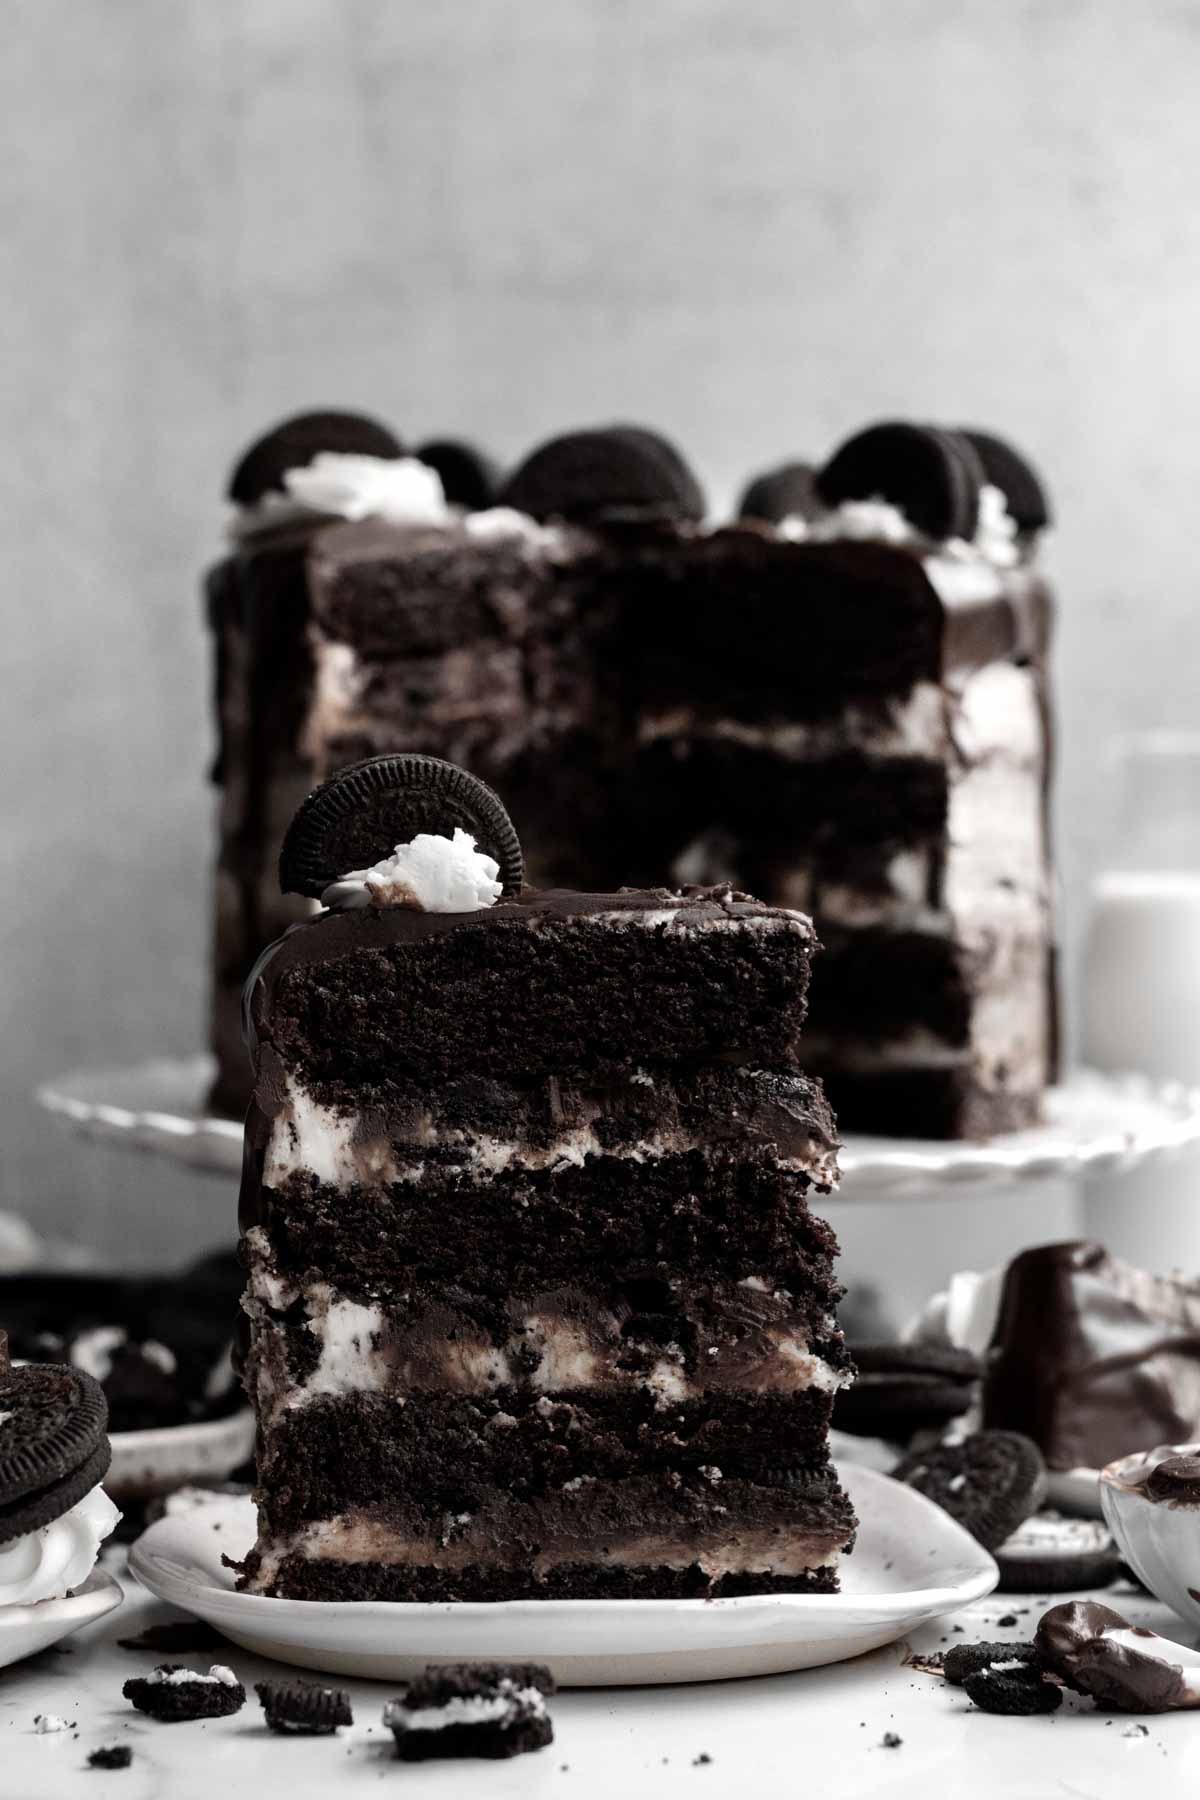 A slice of Cookies and Cream Cake standing triumphantly.